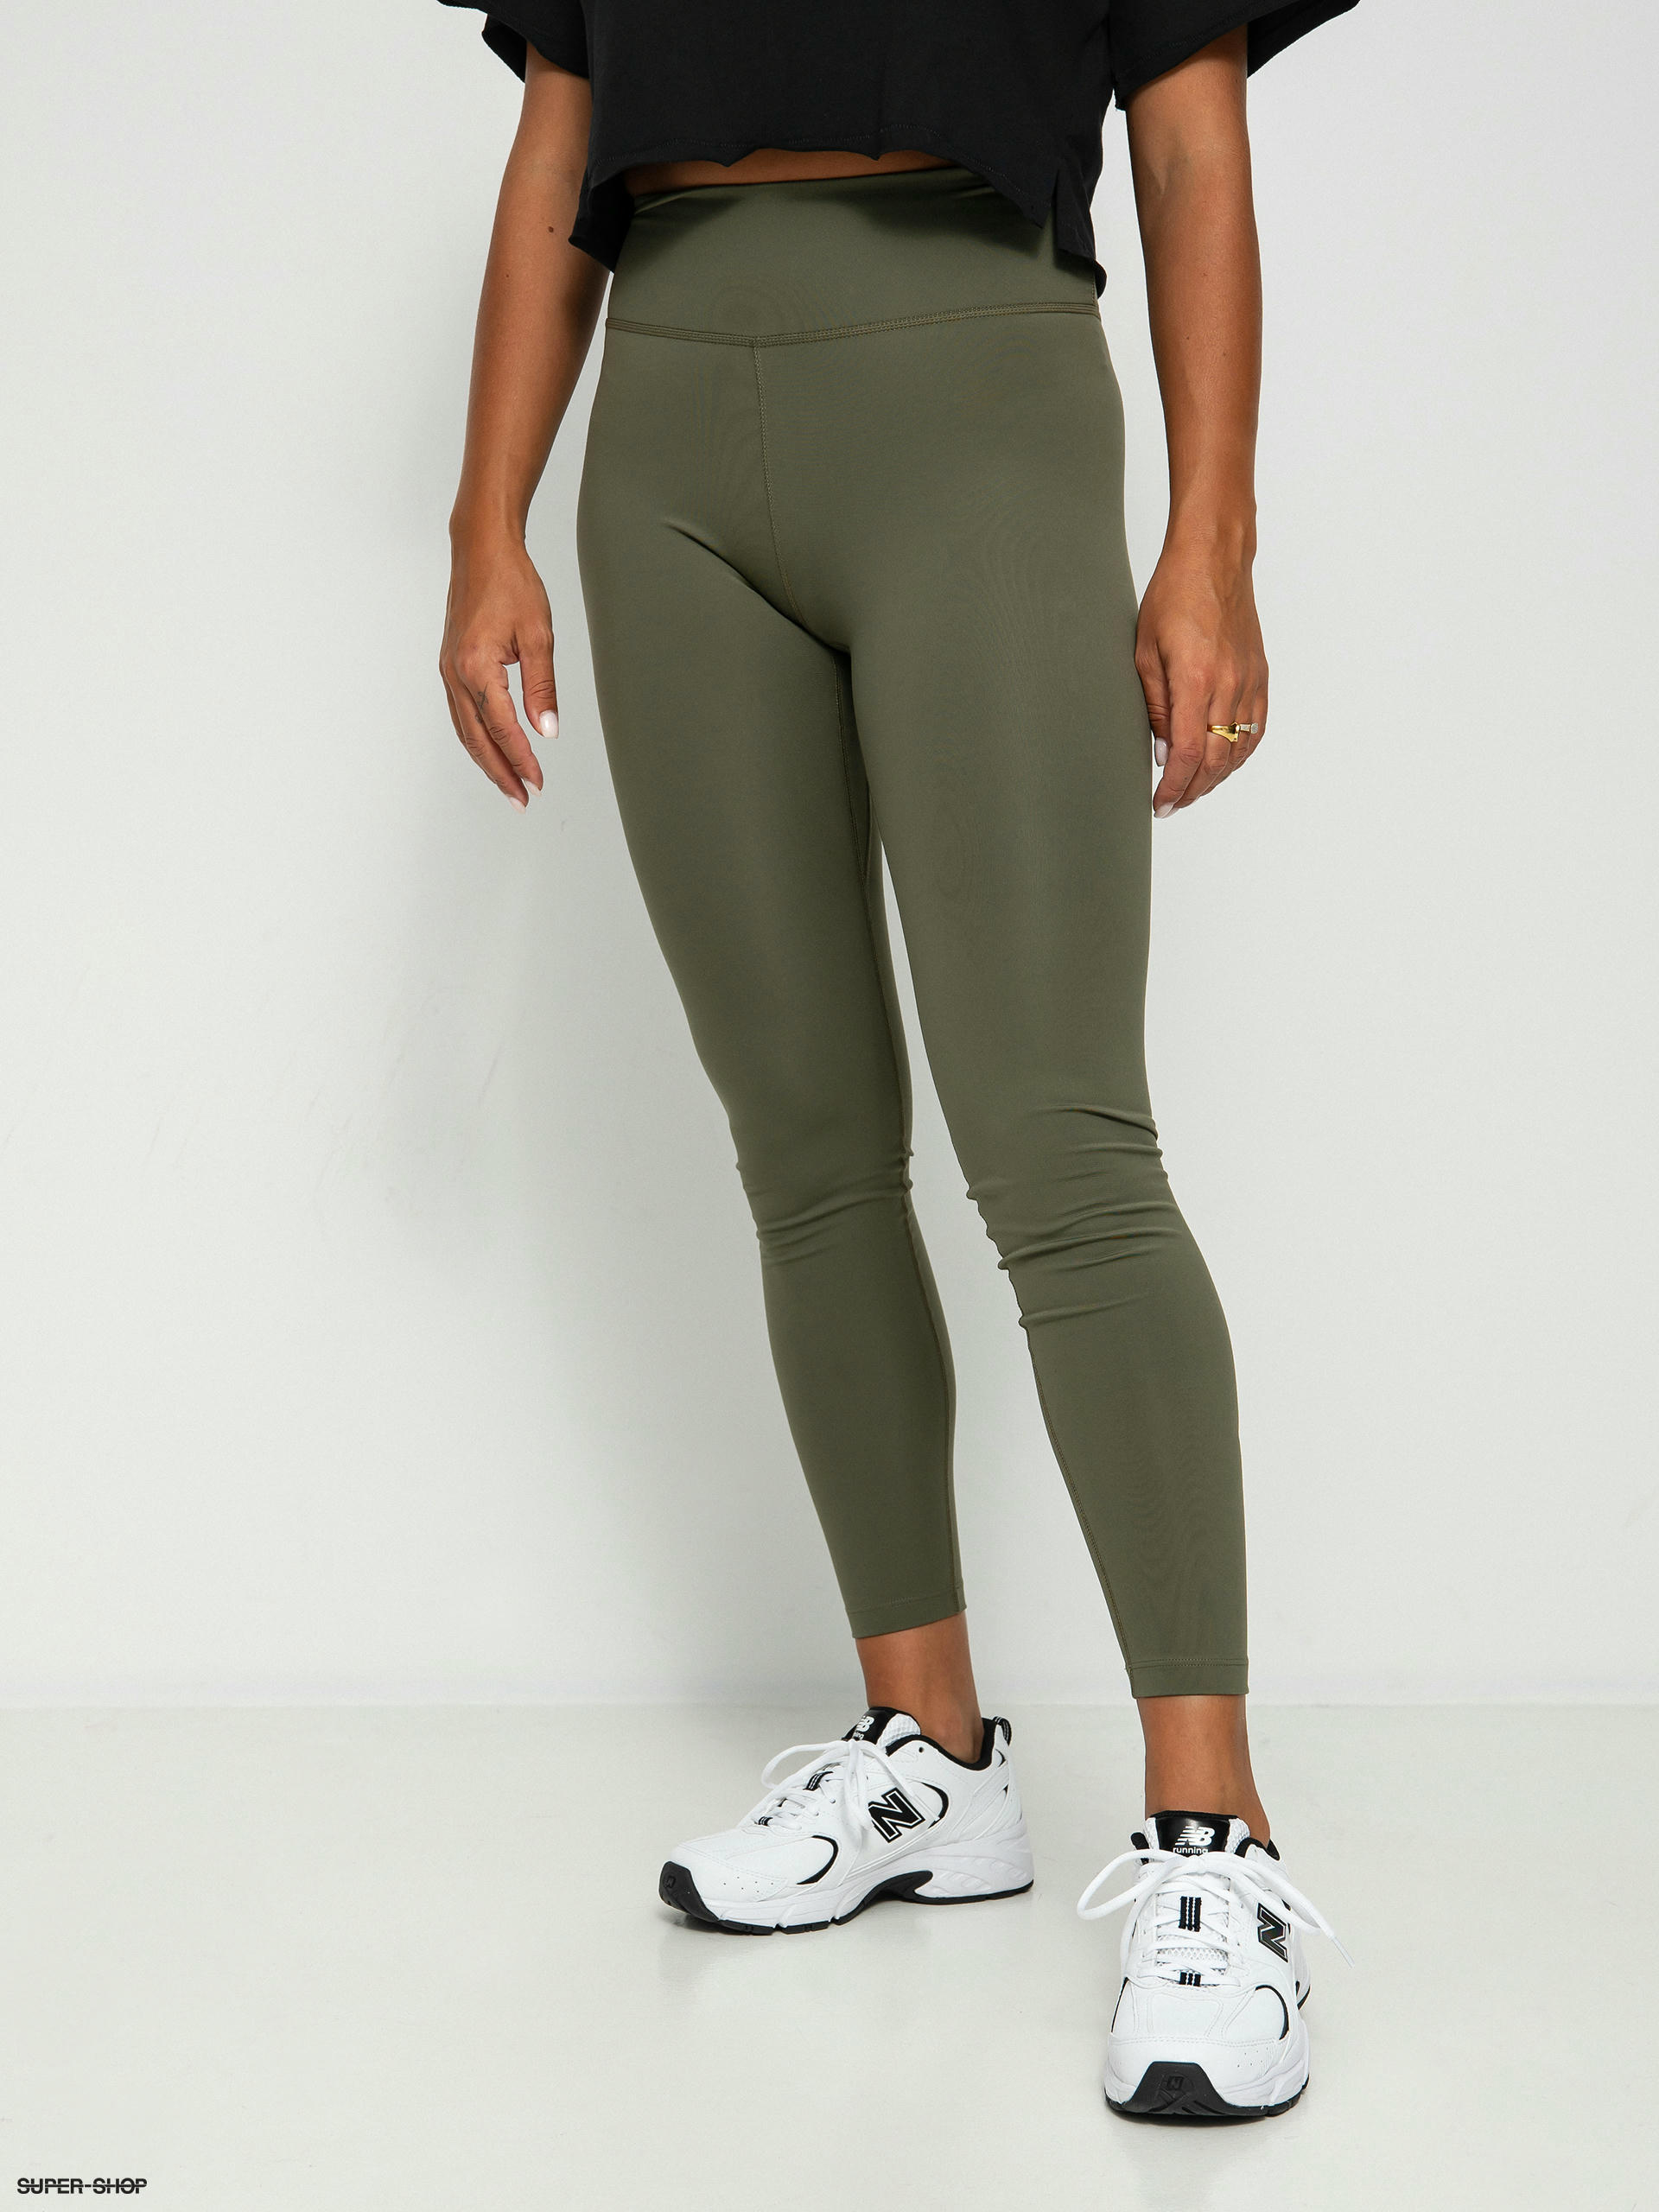 Buy PUMA Women's ESS+ Graphic Leggings, Olive, Small at Amazon.in